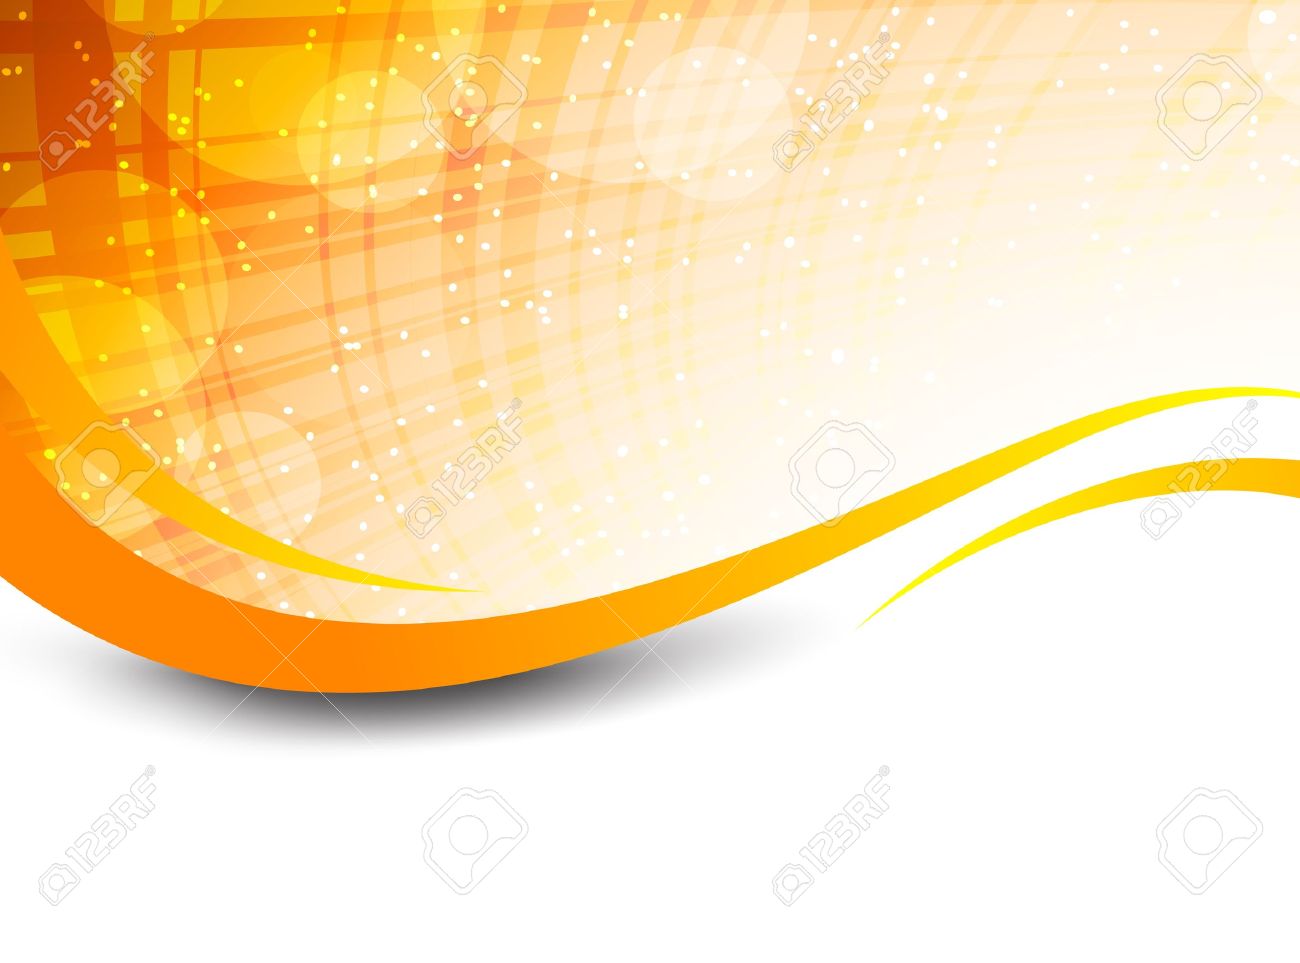 Wavy Orange Background With Circles Abstract Illustration Royalty